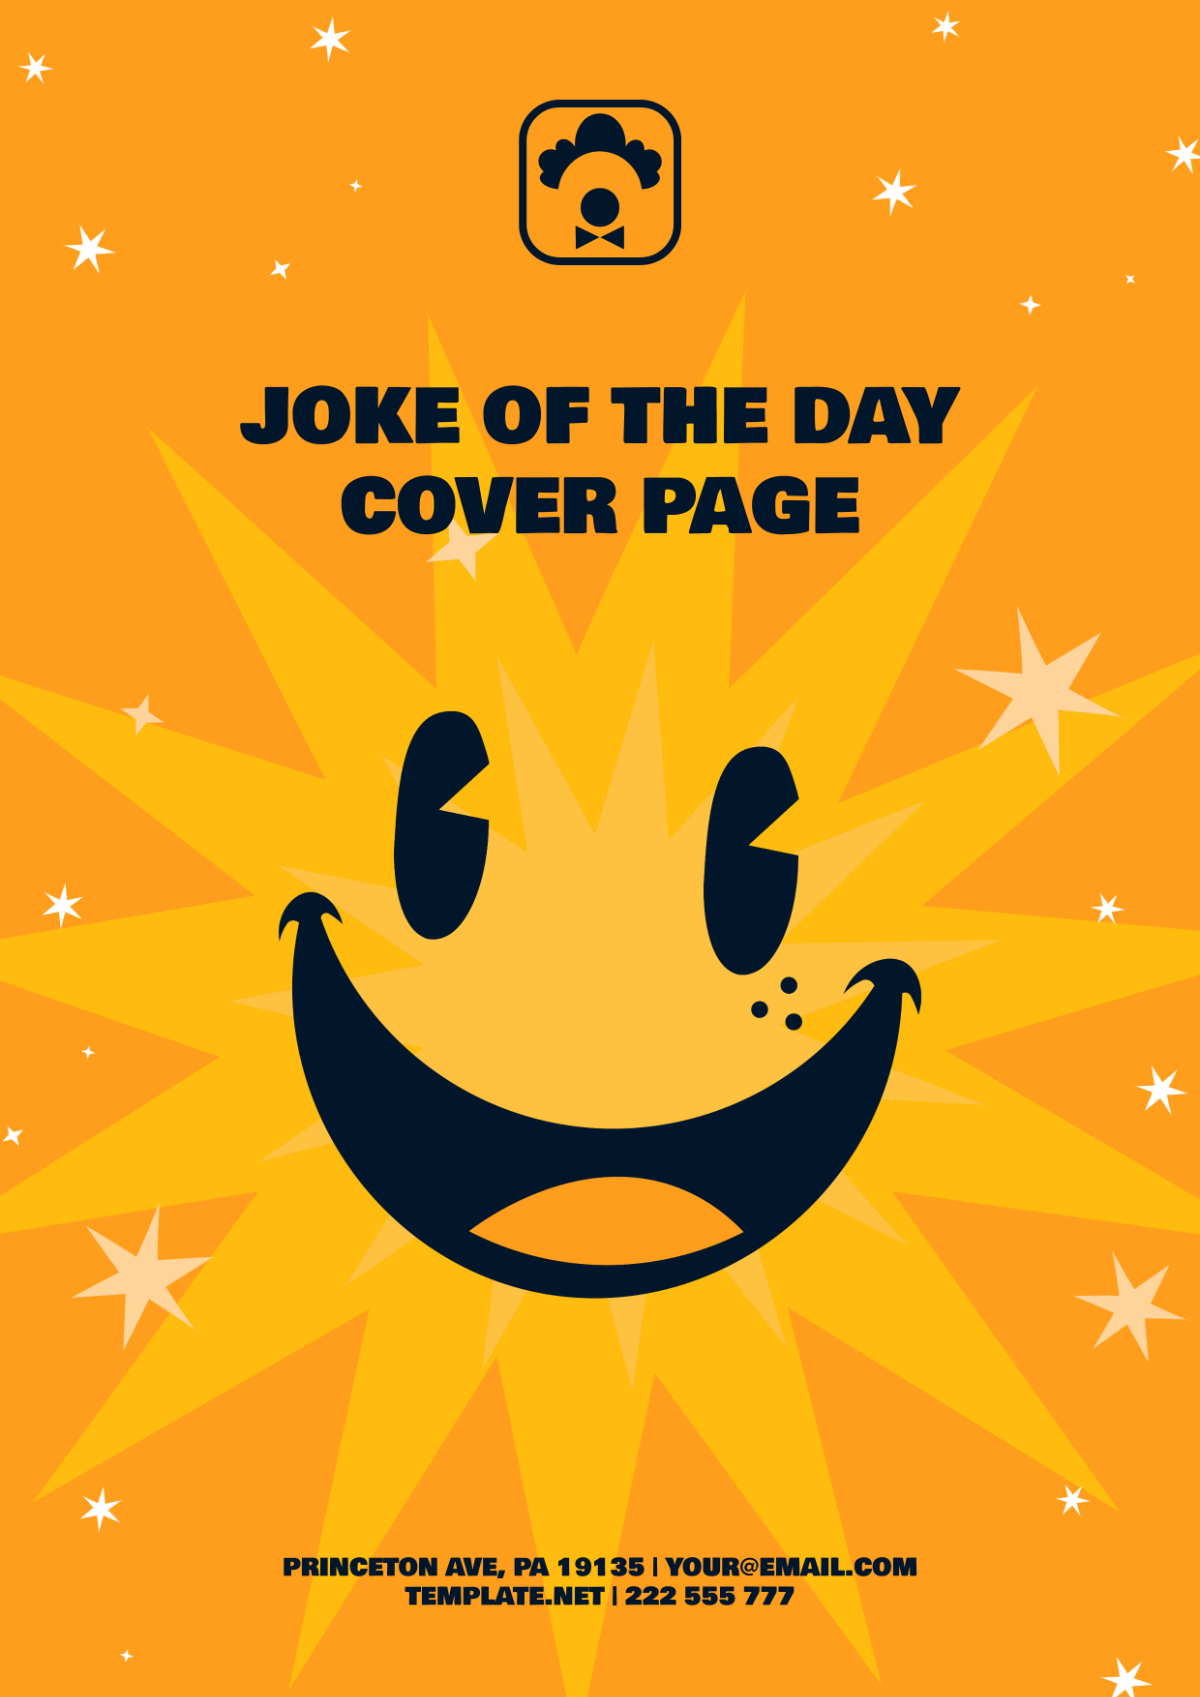 Joke of the Day Cover Page Template